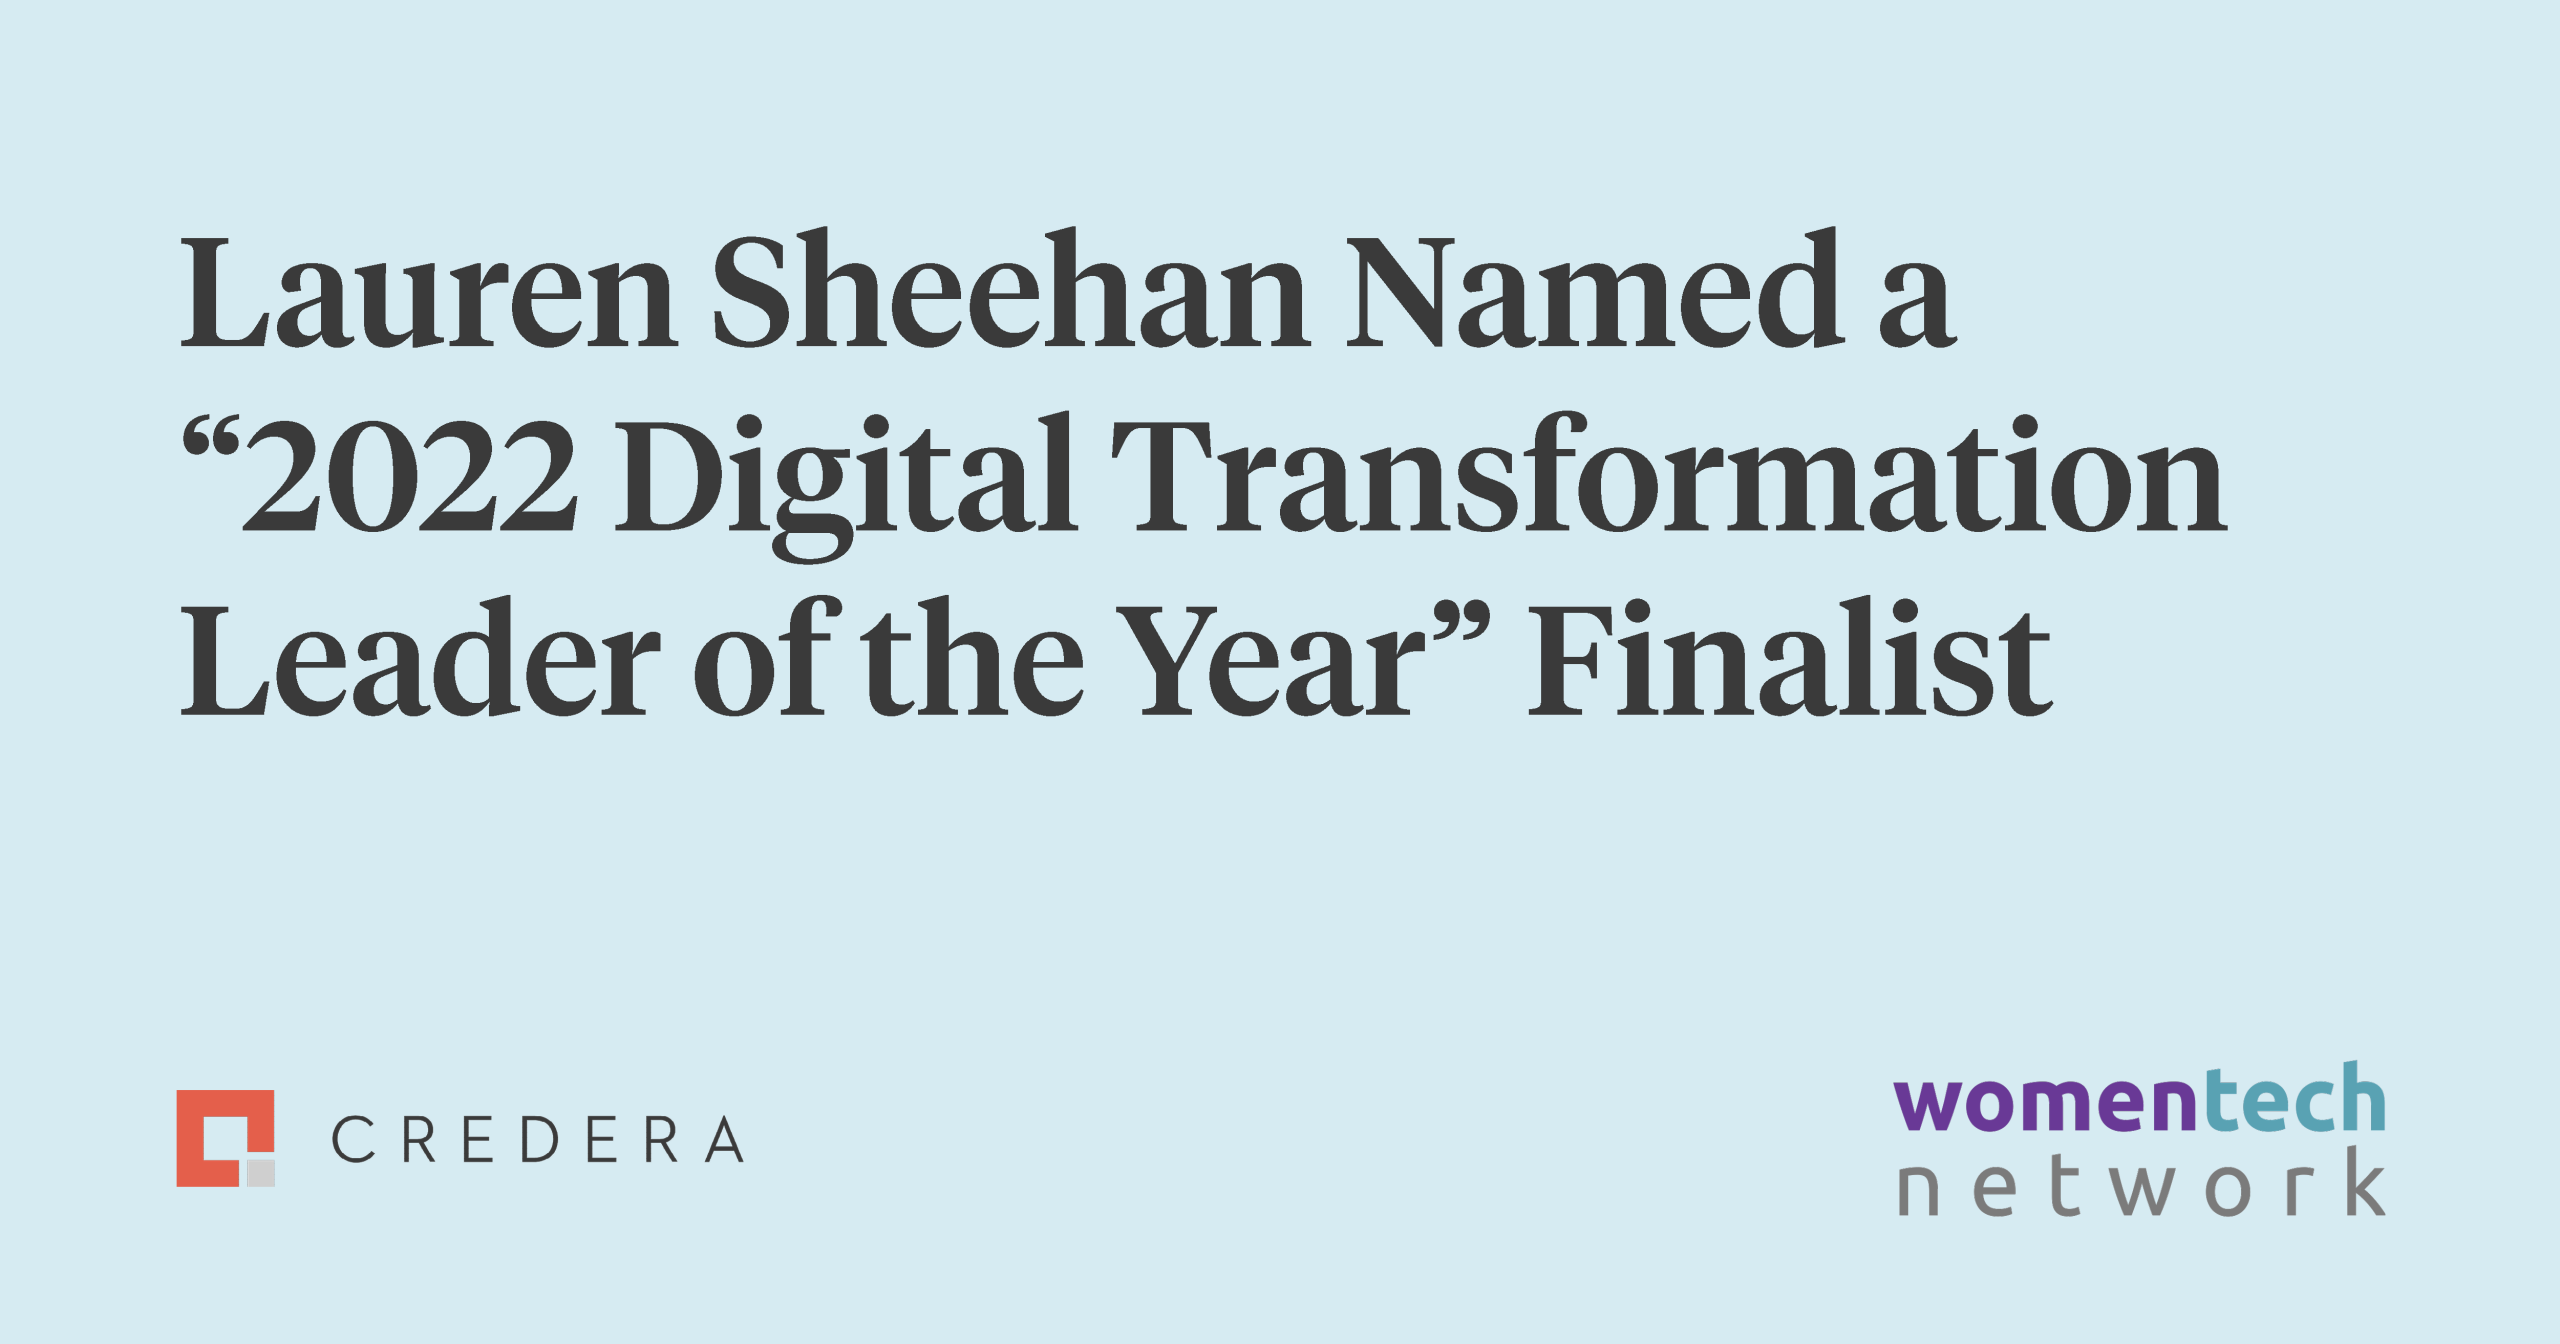 Lauren Sheehan Honored as a 2022 Finalist for WomenTech Network’s Digital Transformation Leader of the Year